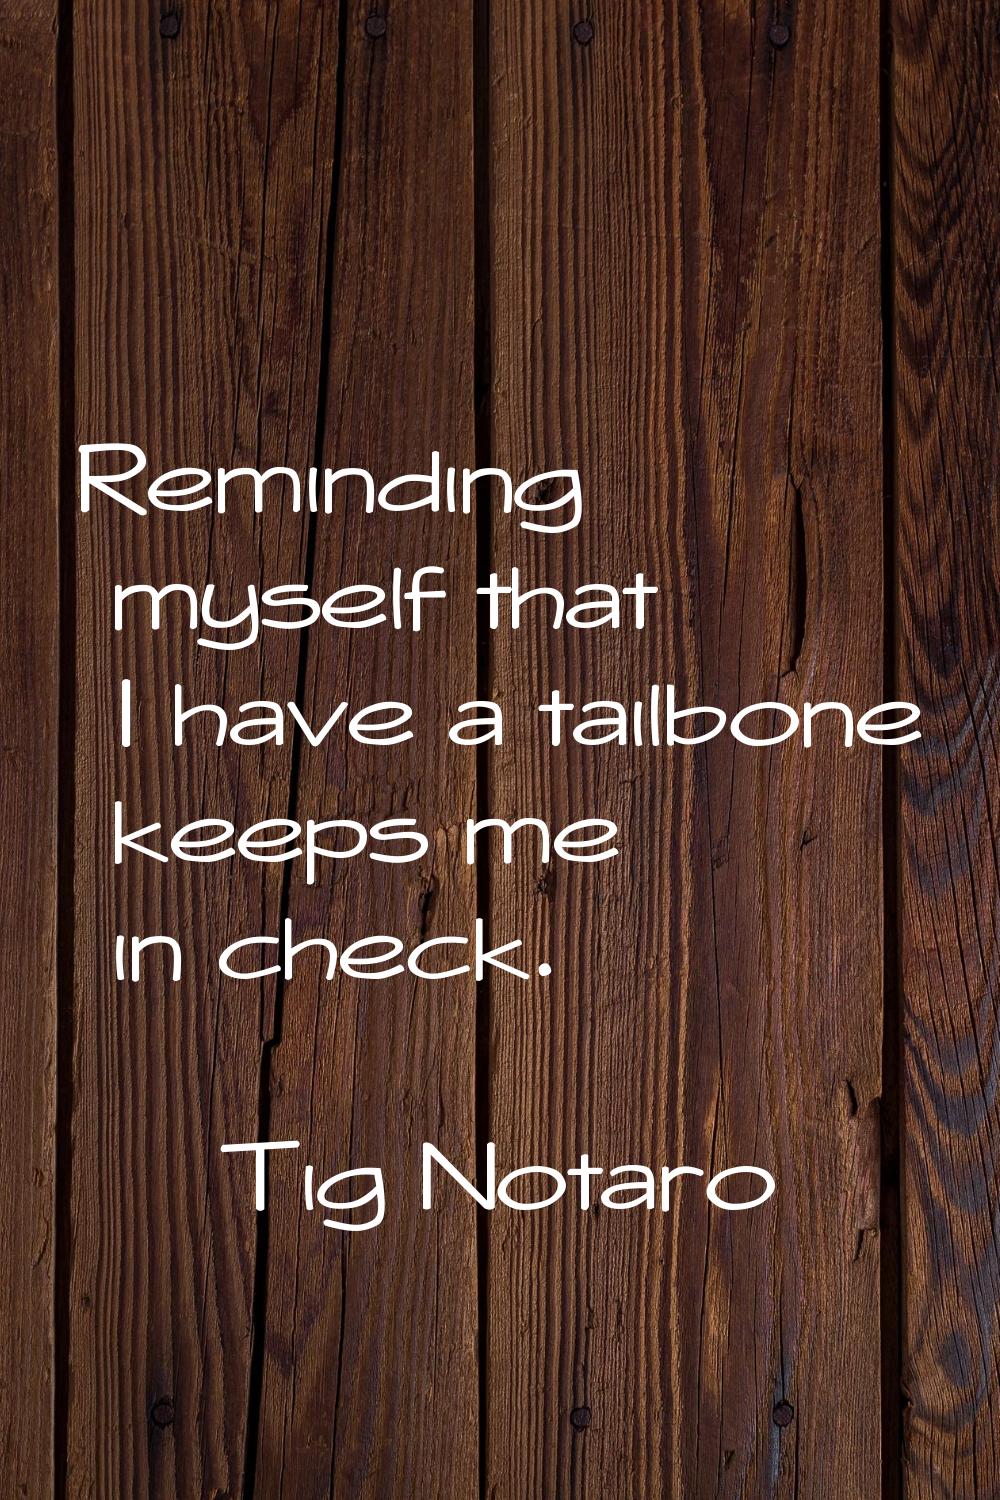 Reminding myself that I have a tailbone keeps me in check.